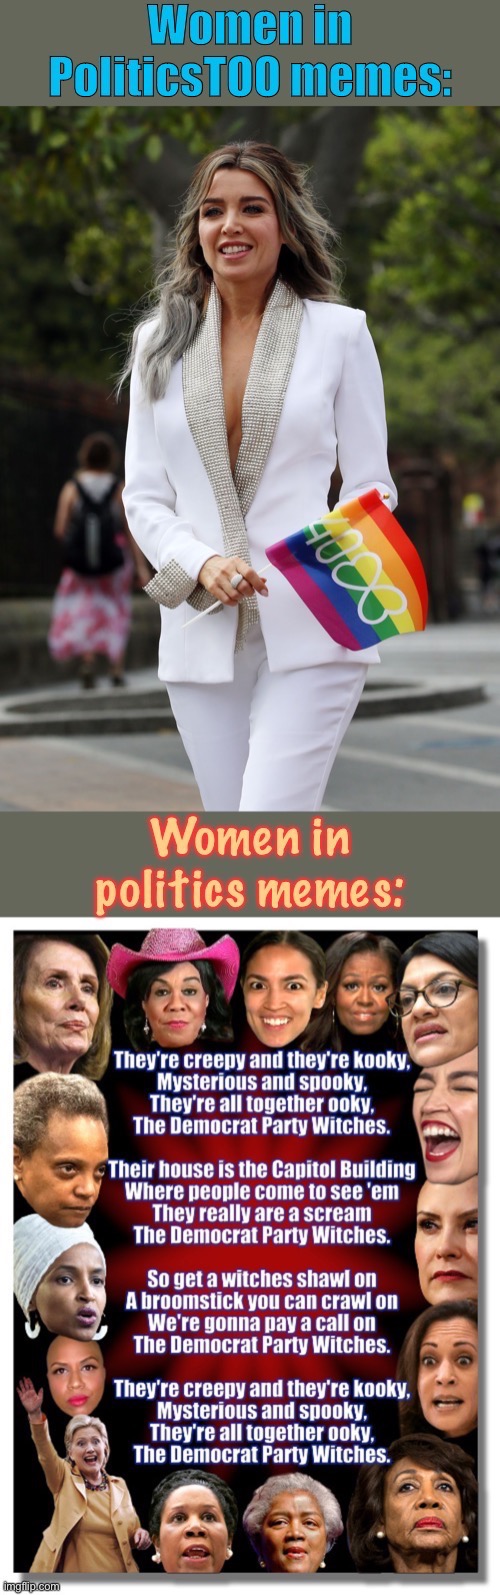 [Post your hateful or non-hateful women-inspired memes in the chats!] | image tagged in politics,women,misogyny,sexism,sexist,memes about memes | made w/ Imgflip meme maker